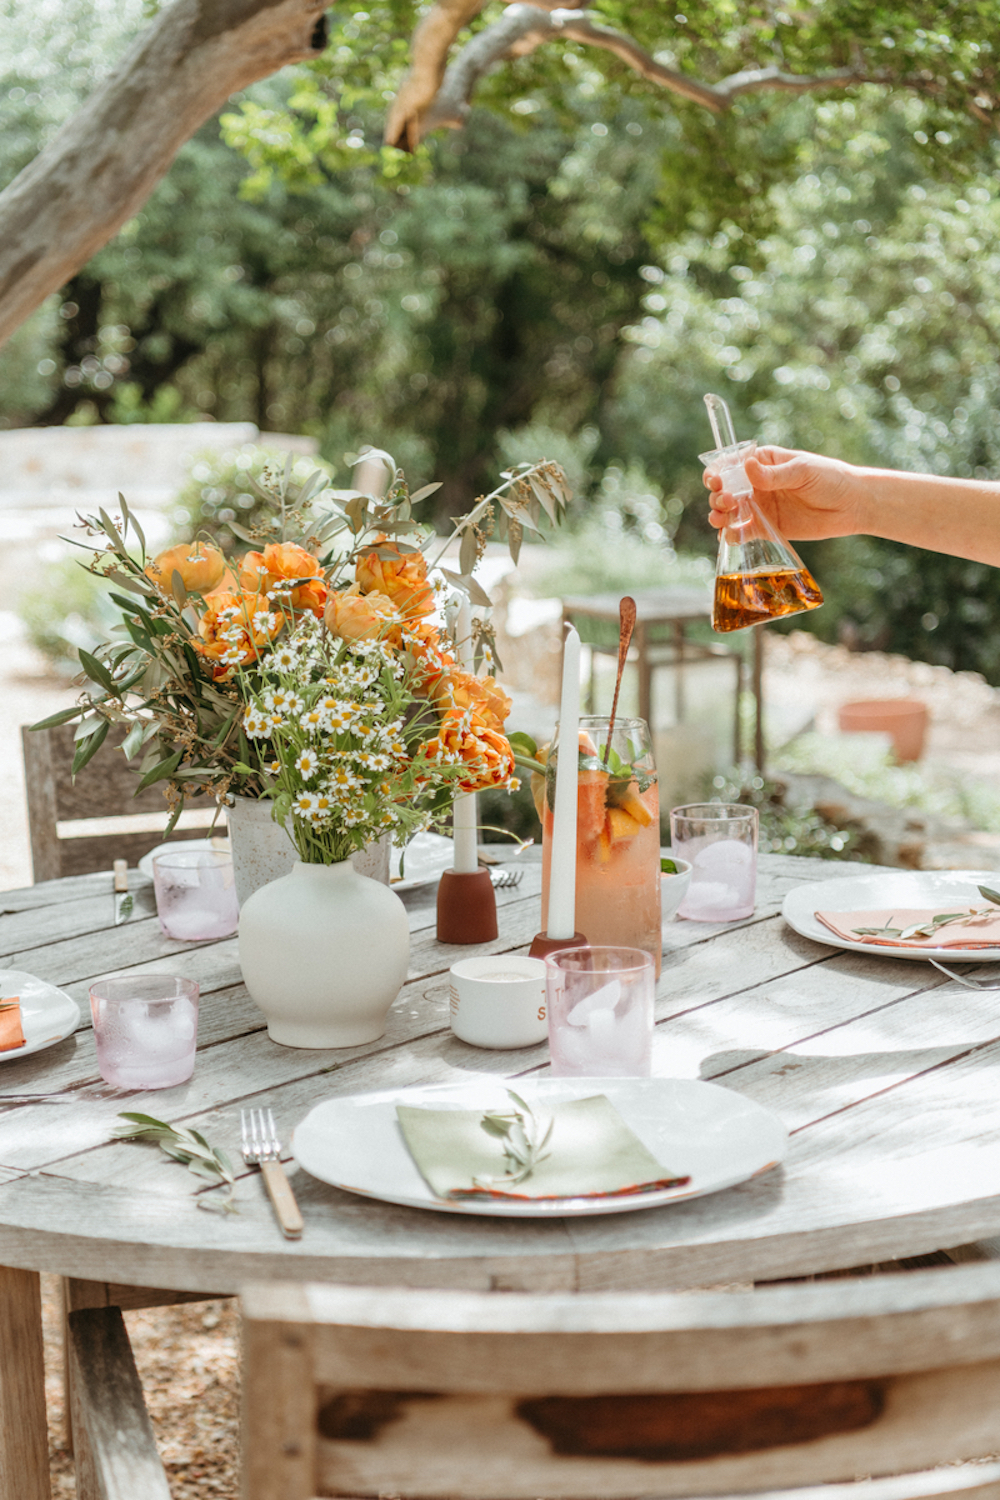 Sunny outdoor dining table with white plates, gray linen napkins, simple flatware, and an arrangement of eucalyptus, orange flowers, and daisies.